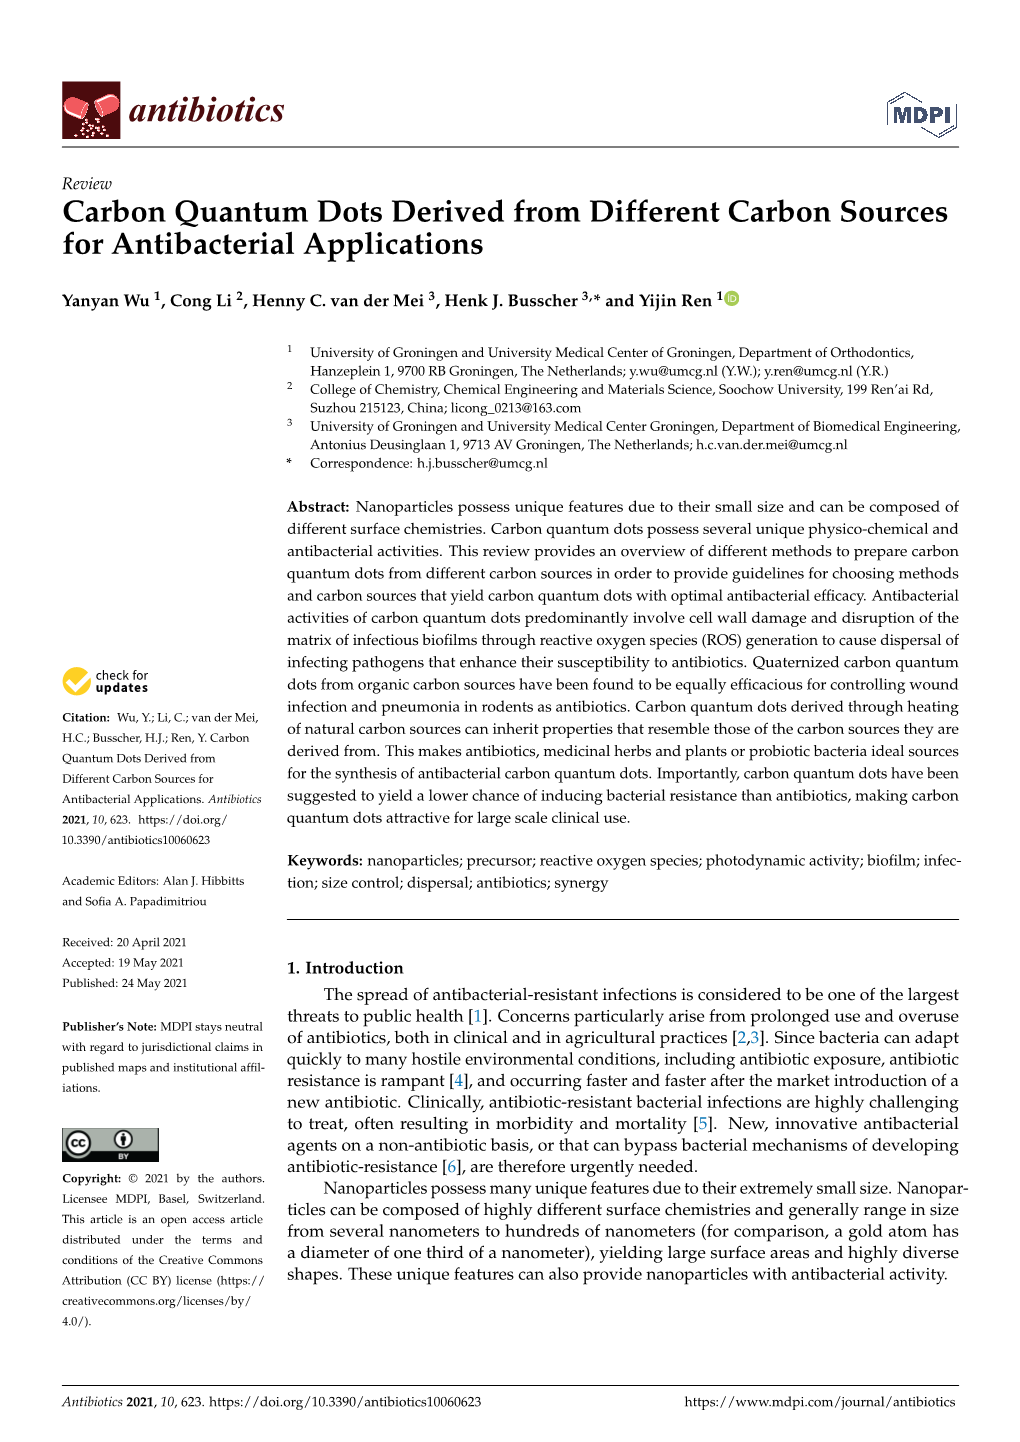 Carbon Quantum Dots Derived from Different Carbon Sources for Antibacterial Applications